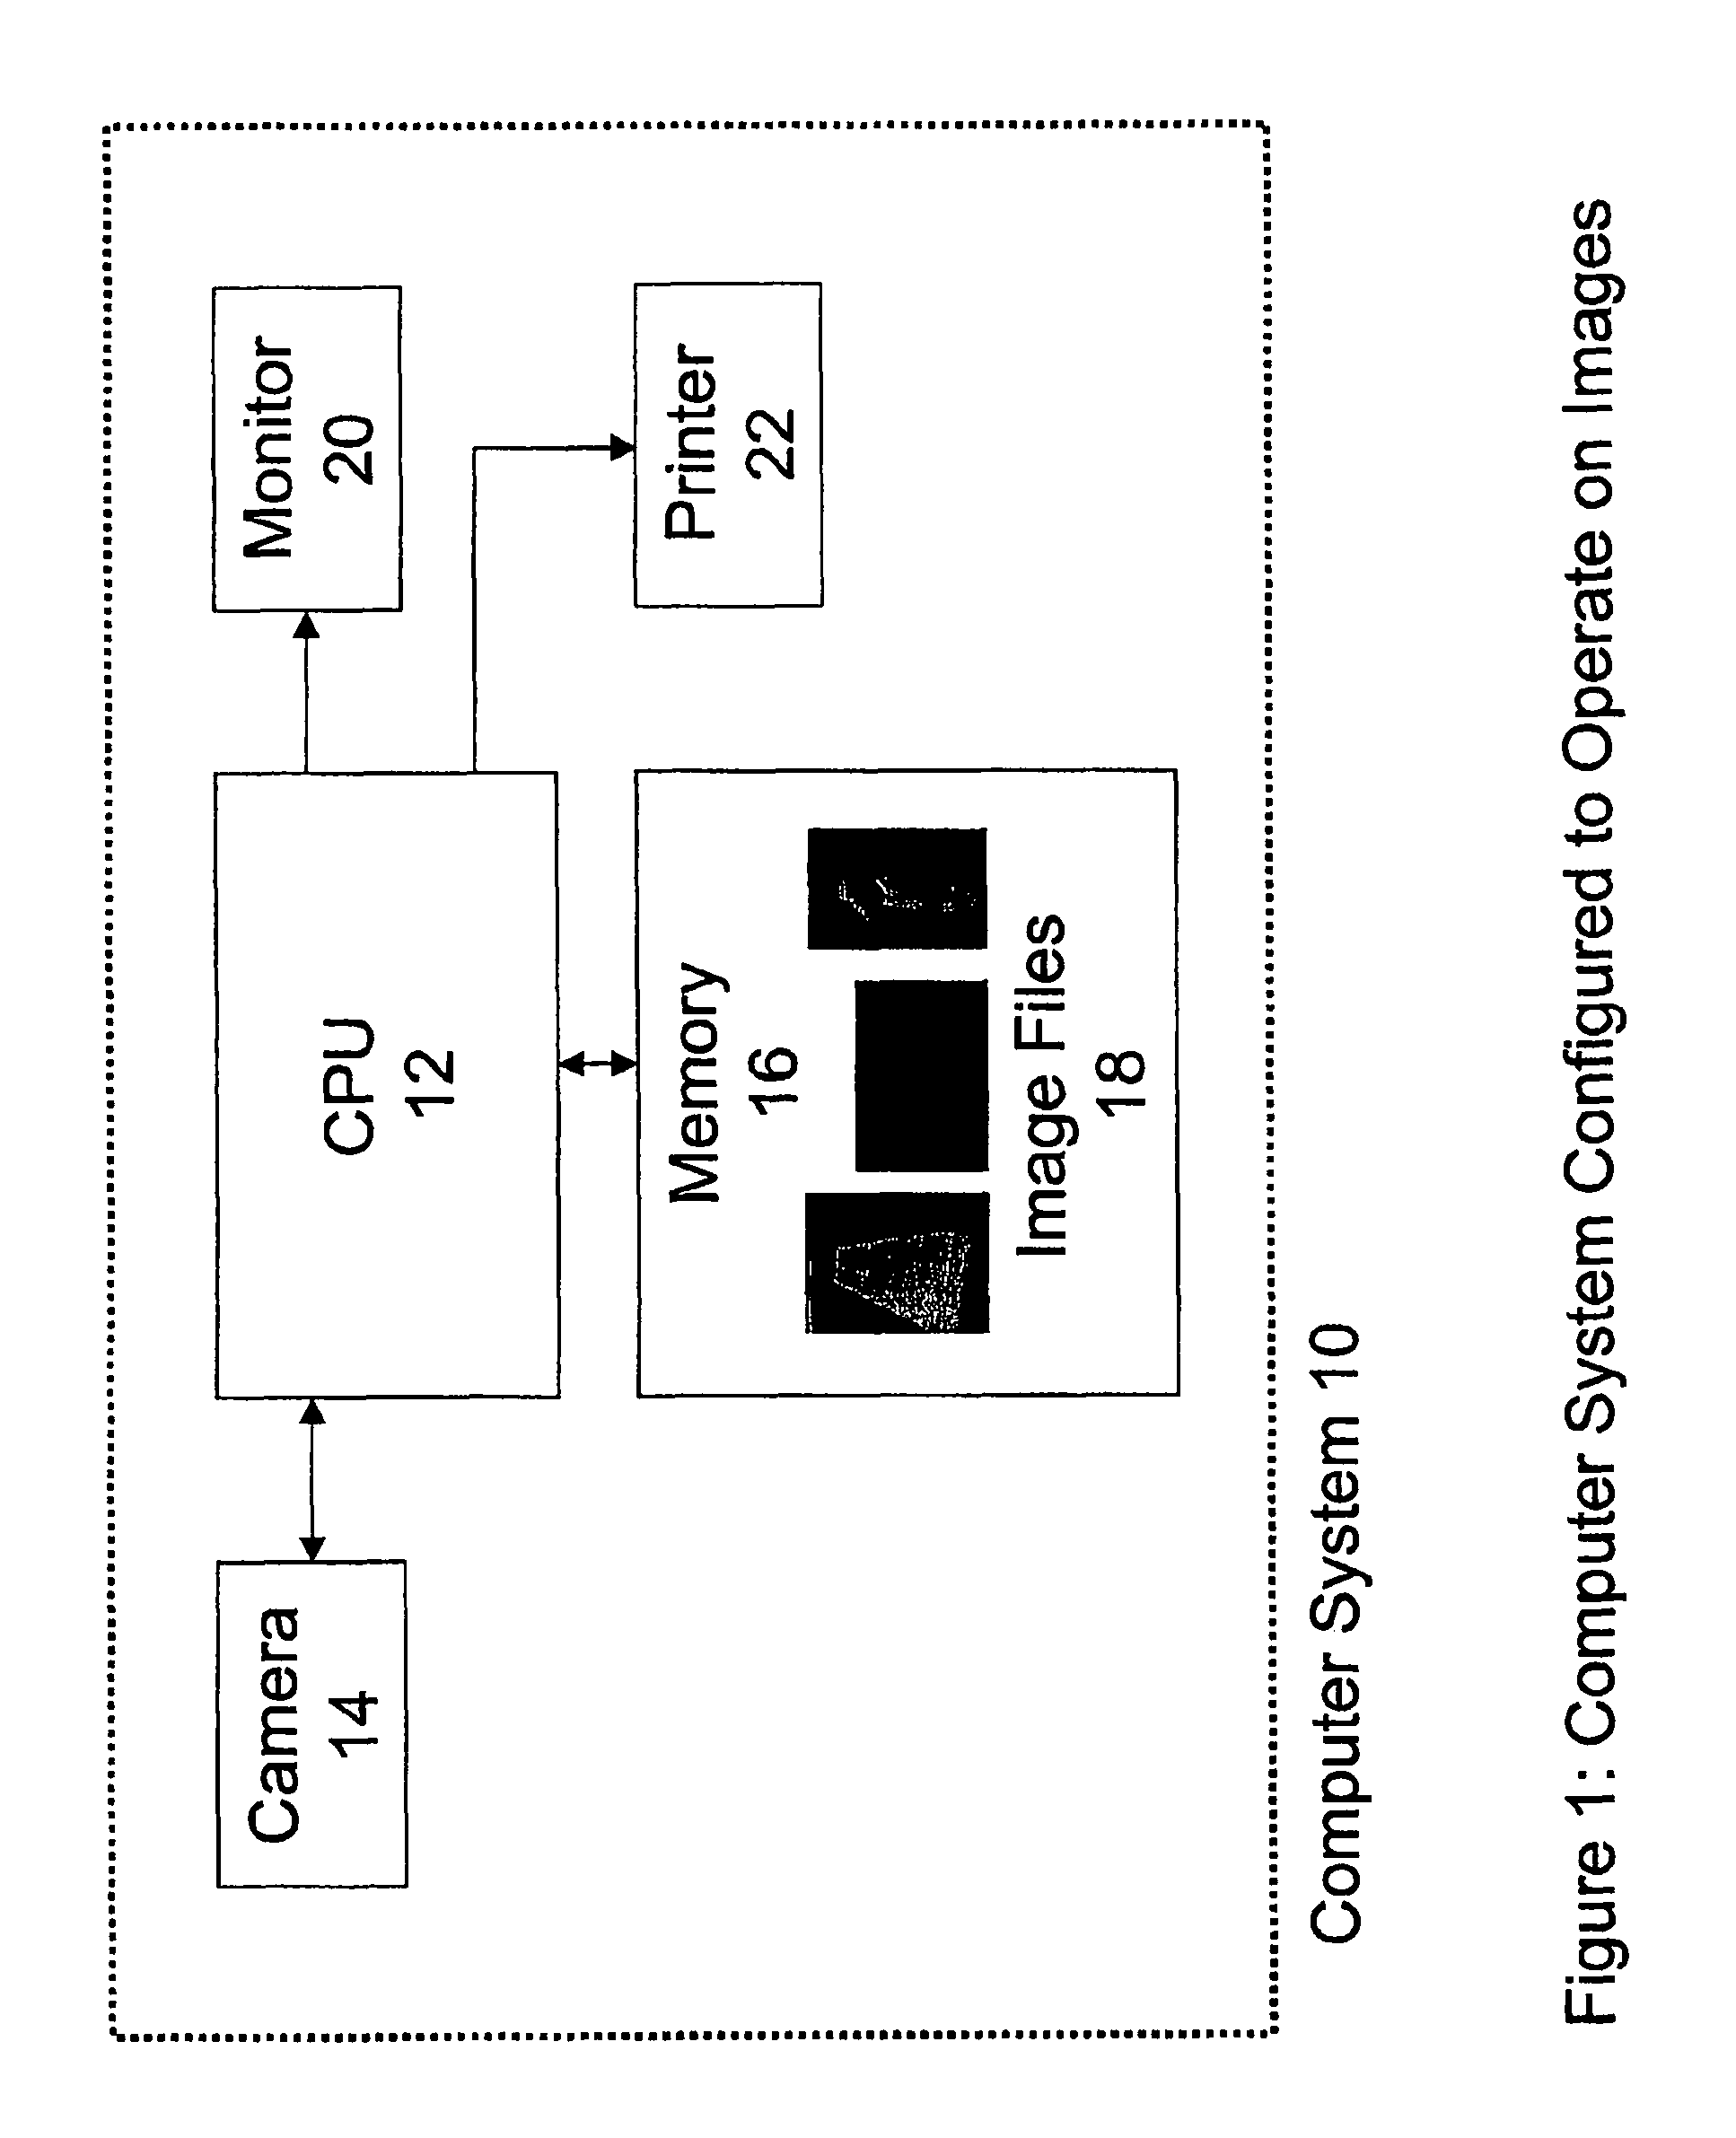 System and method for identifying complex tokens in an image